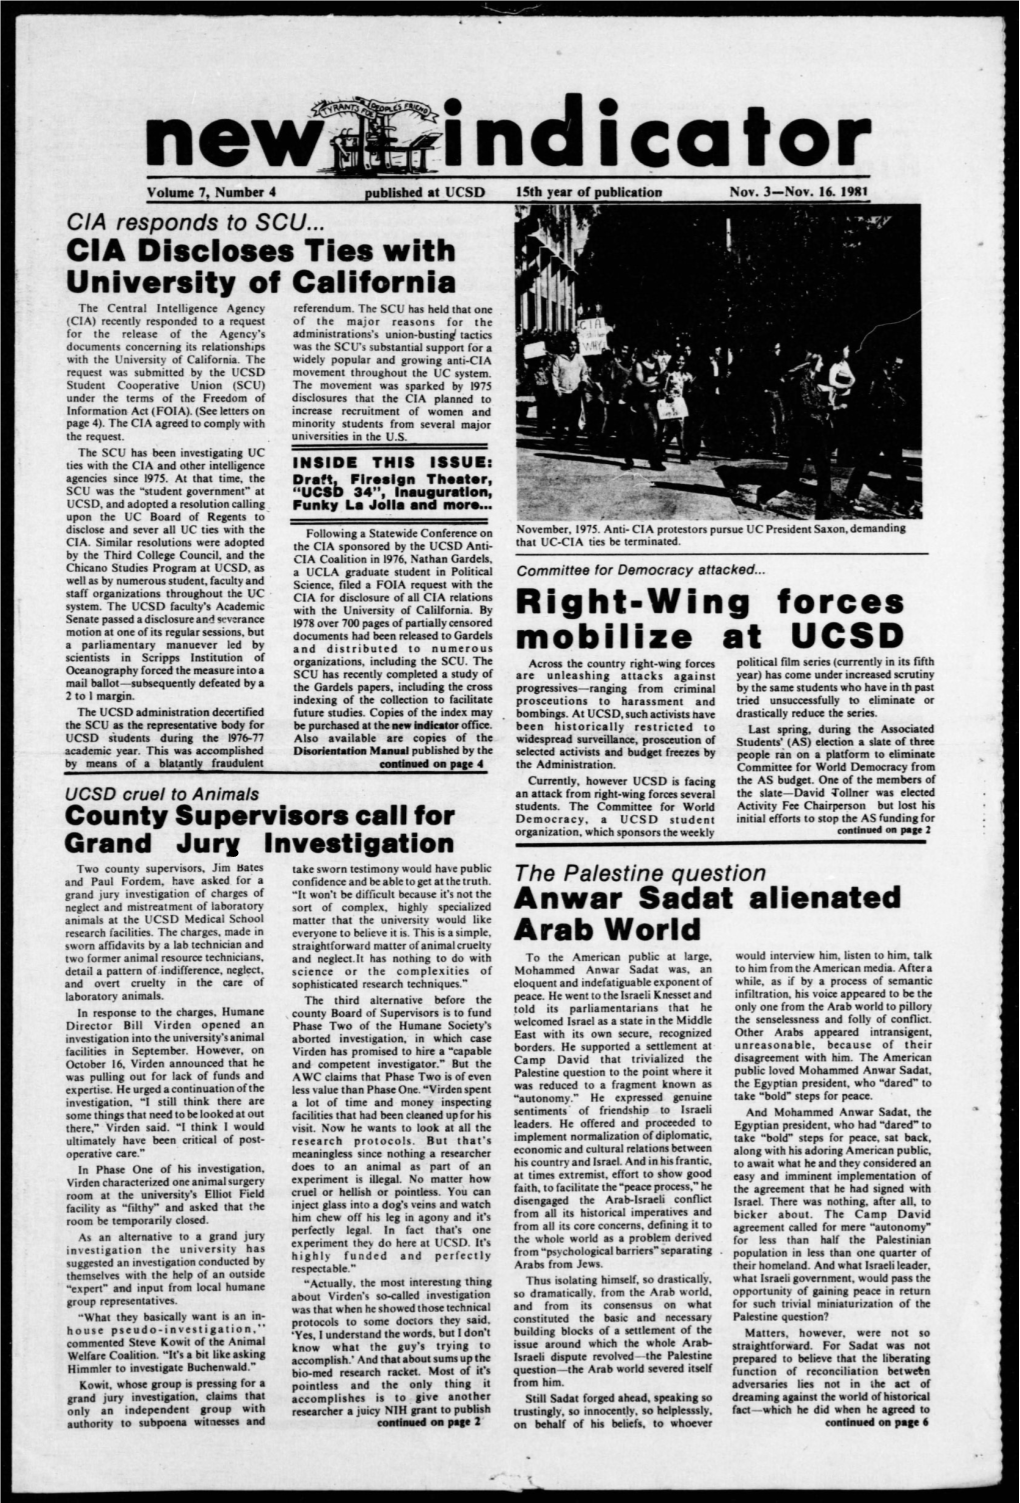 Rightmwing Forces Mobilize at UCSD